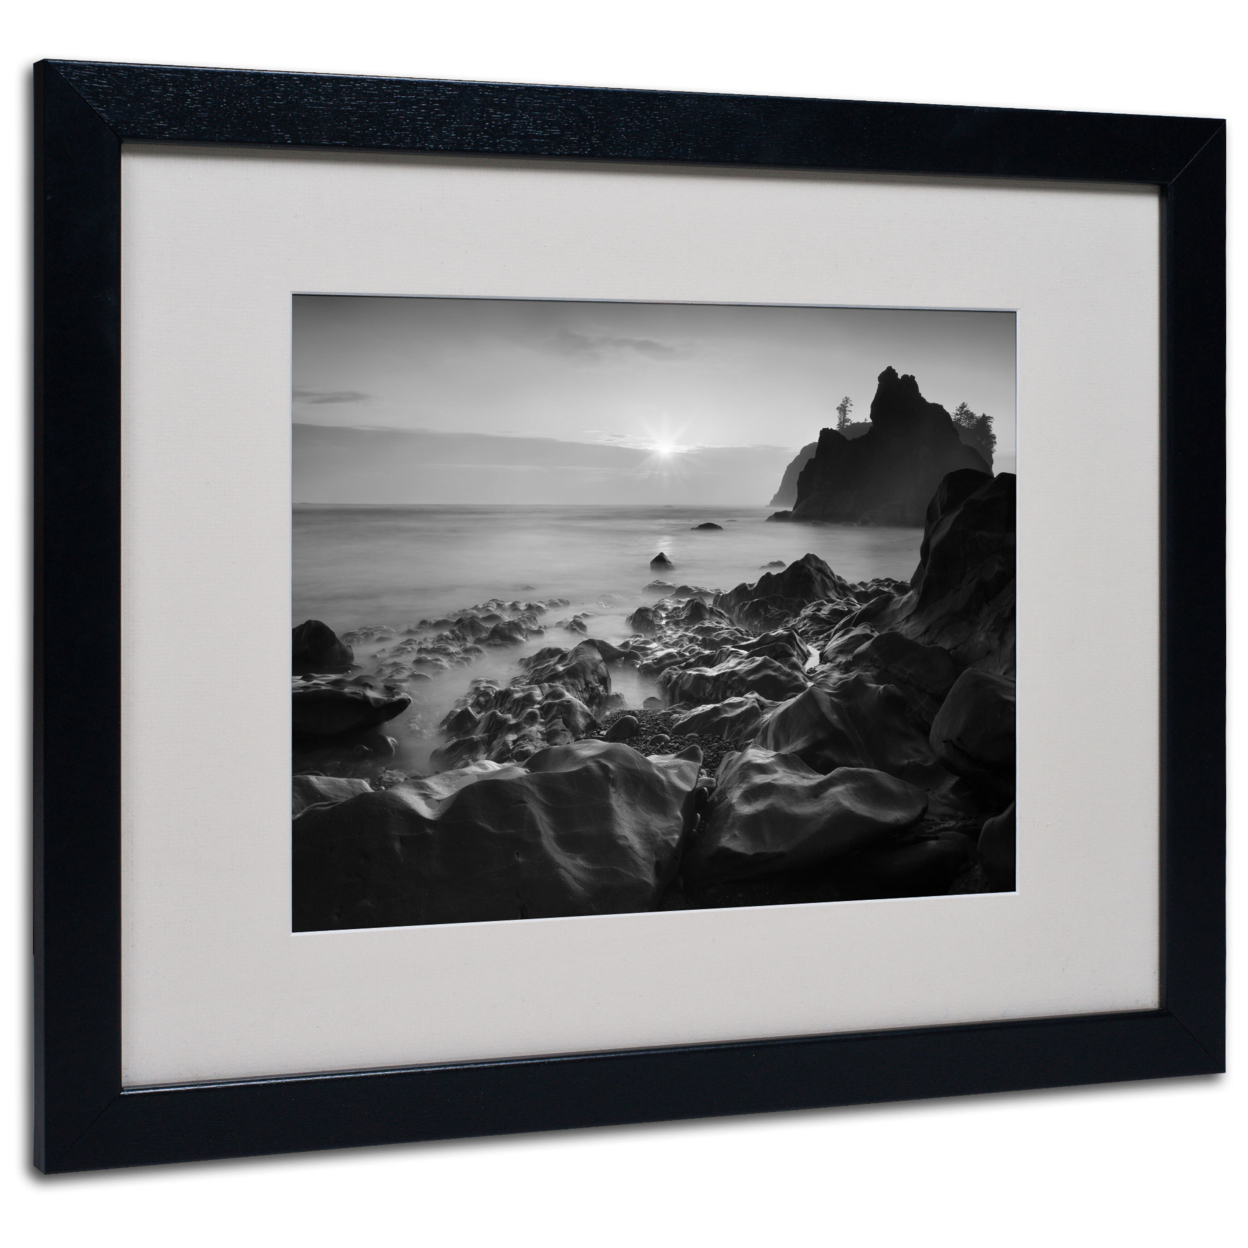 Moises Levy 'Sunset At Ruby Beach' Black Wooden Framed Art 18 X 22 Inches